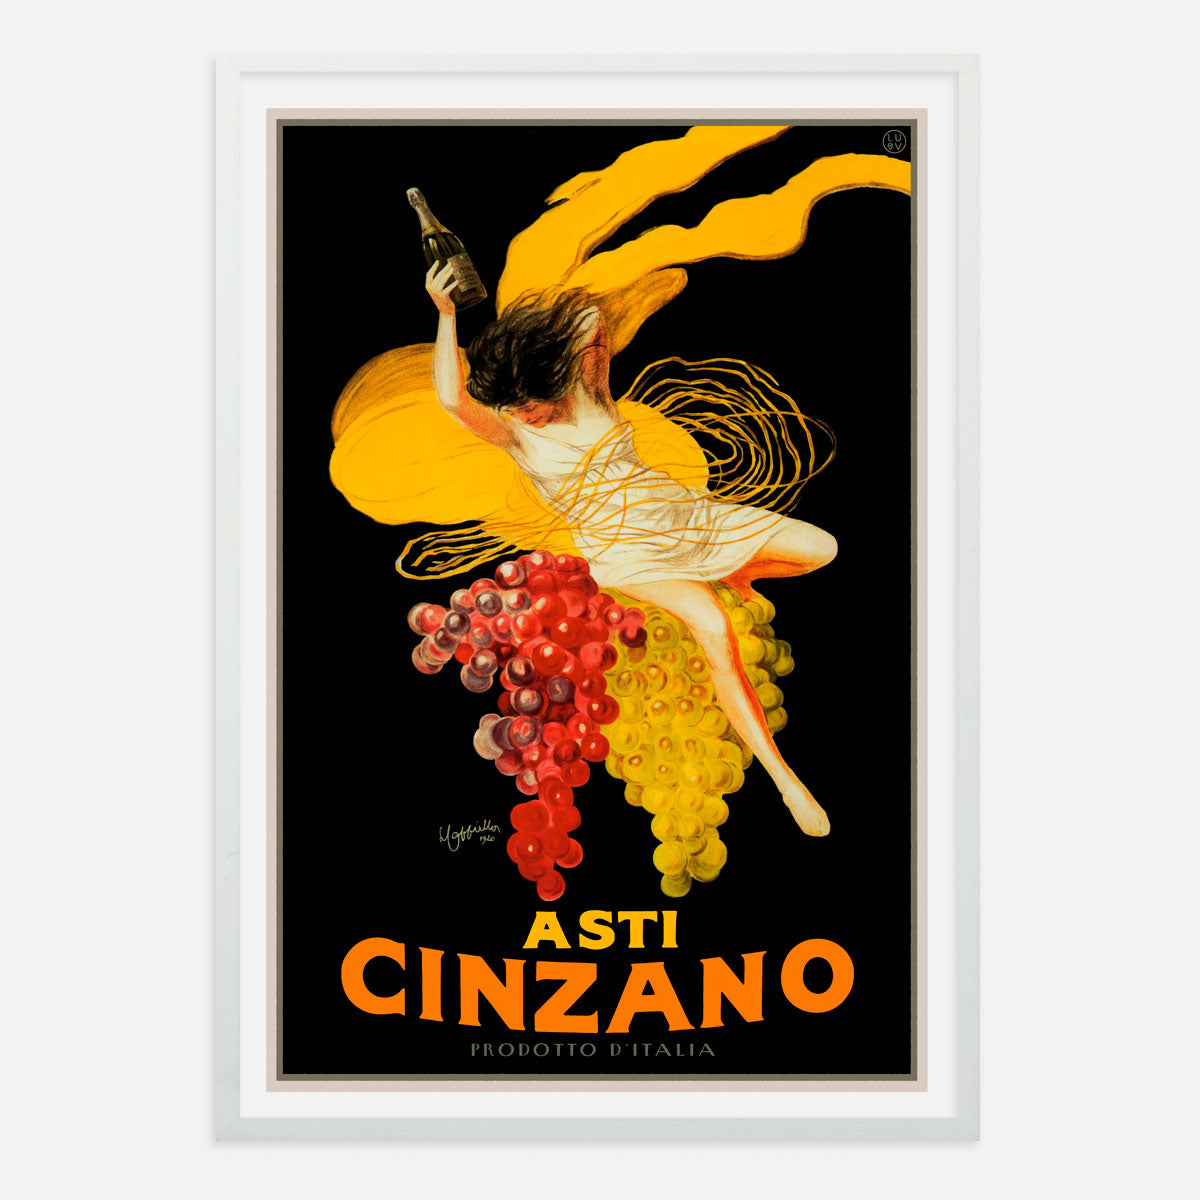 Cinzano retro advertising poster, white frame, Italy Places we Luv